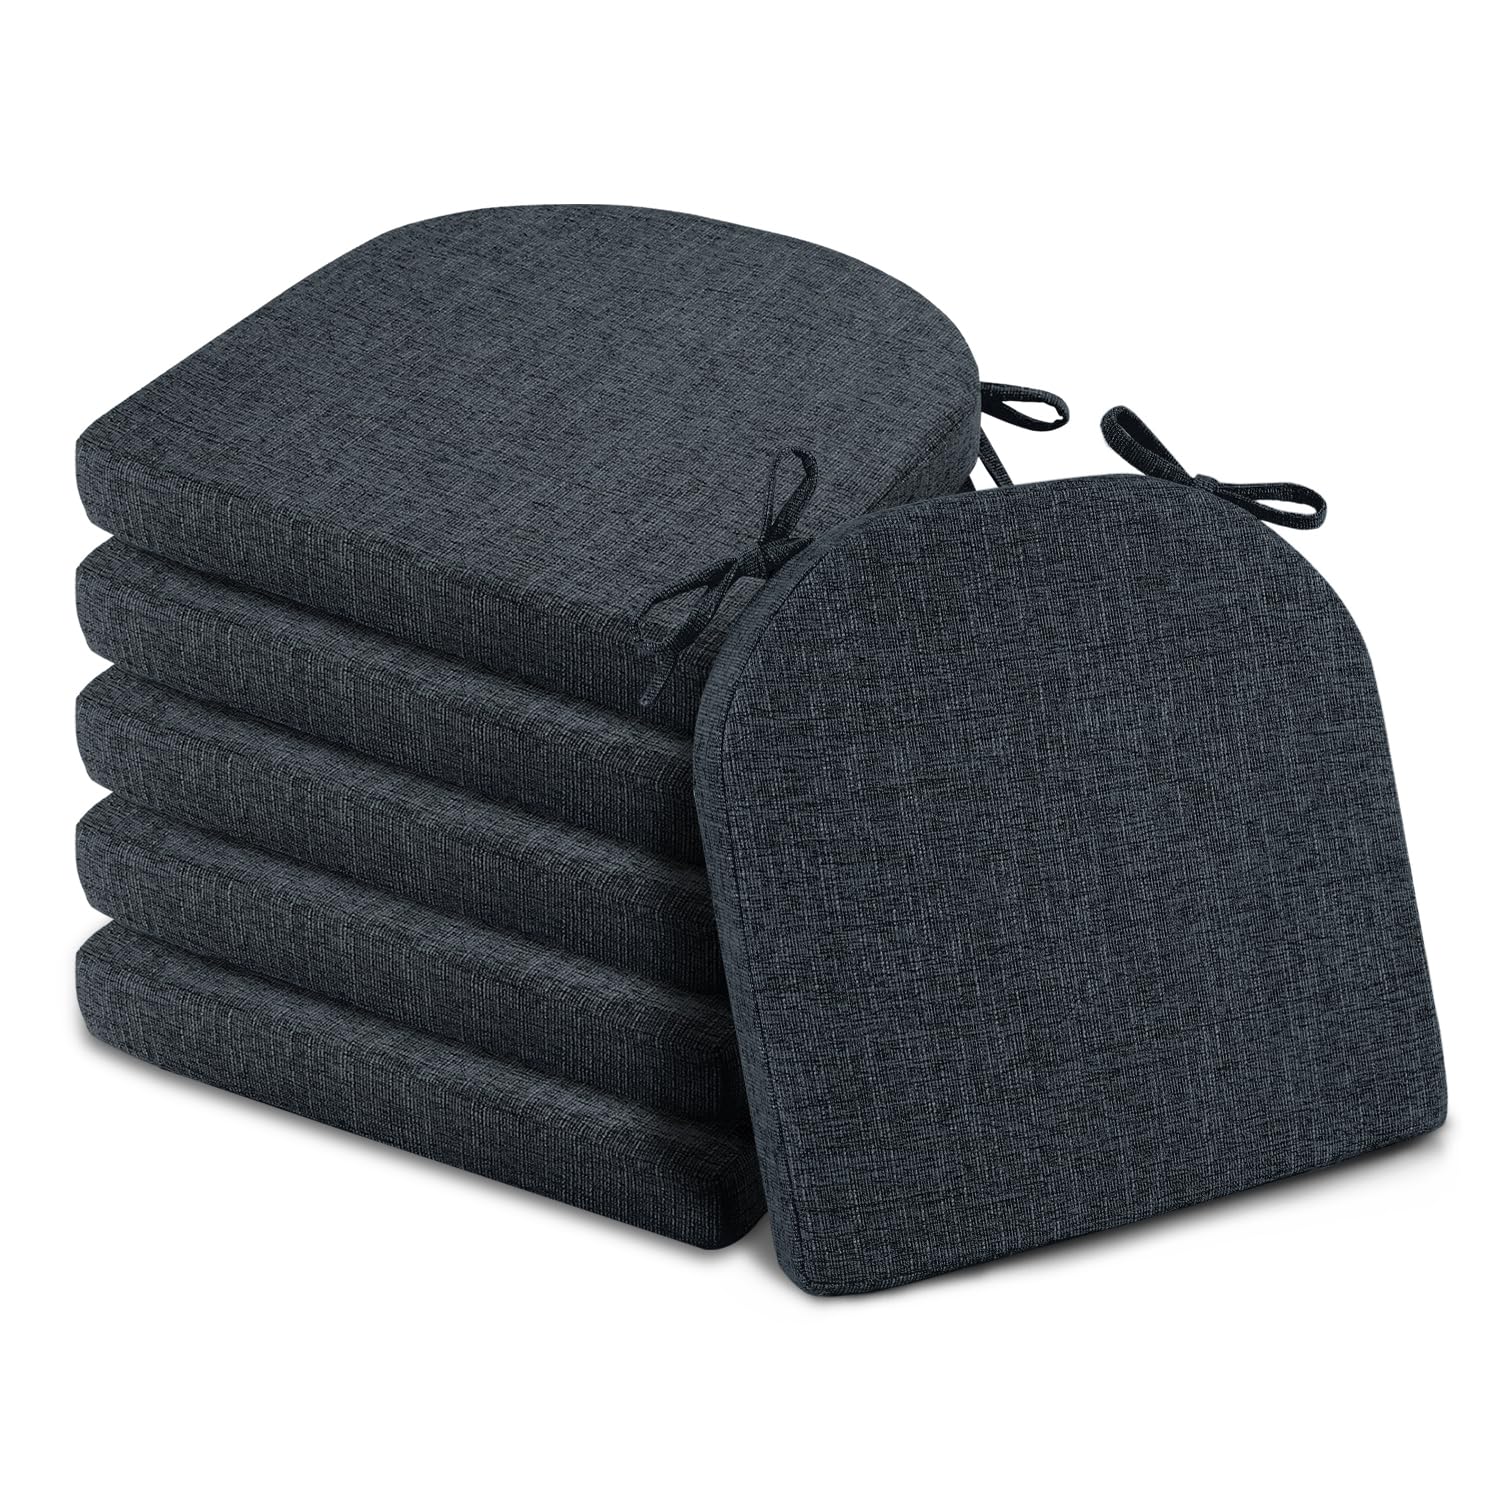 Basic Beyond Memory Foam Dining Chair Cushions, 6 Pack - Navy, 16 x 16 inches, Slip Resistant with Ties, Indoor Use, Modern Style, Resilient